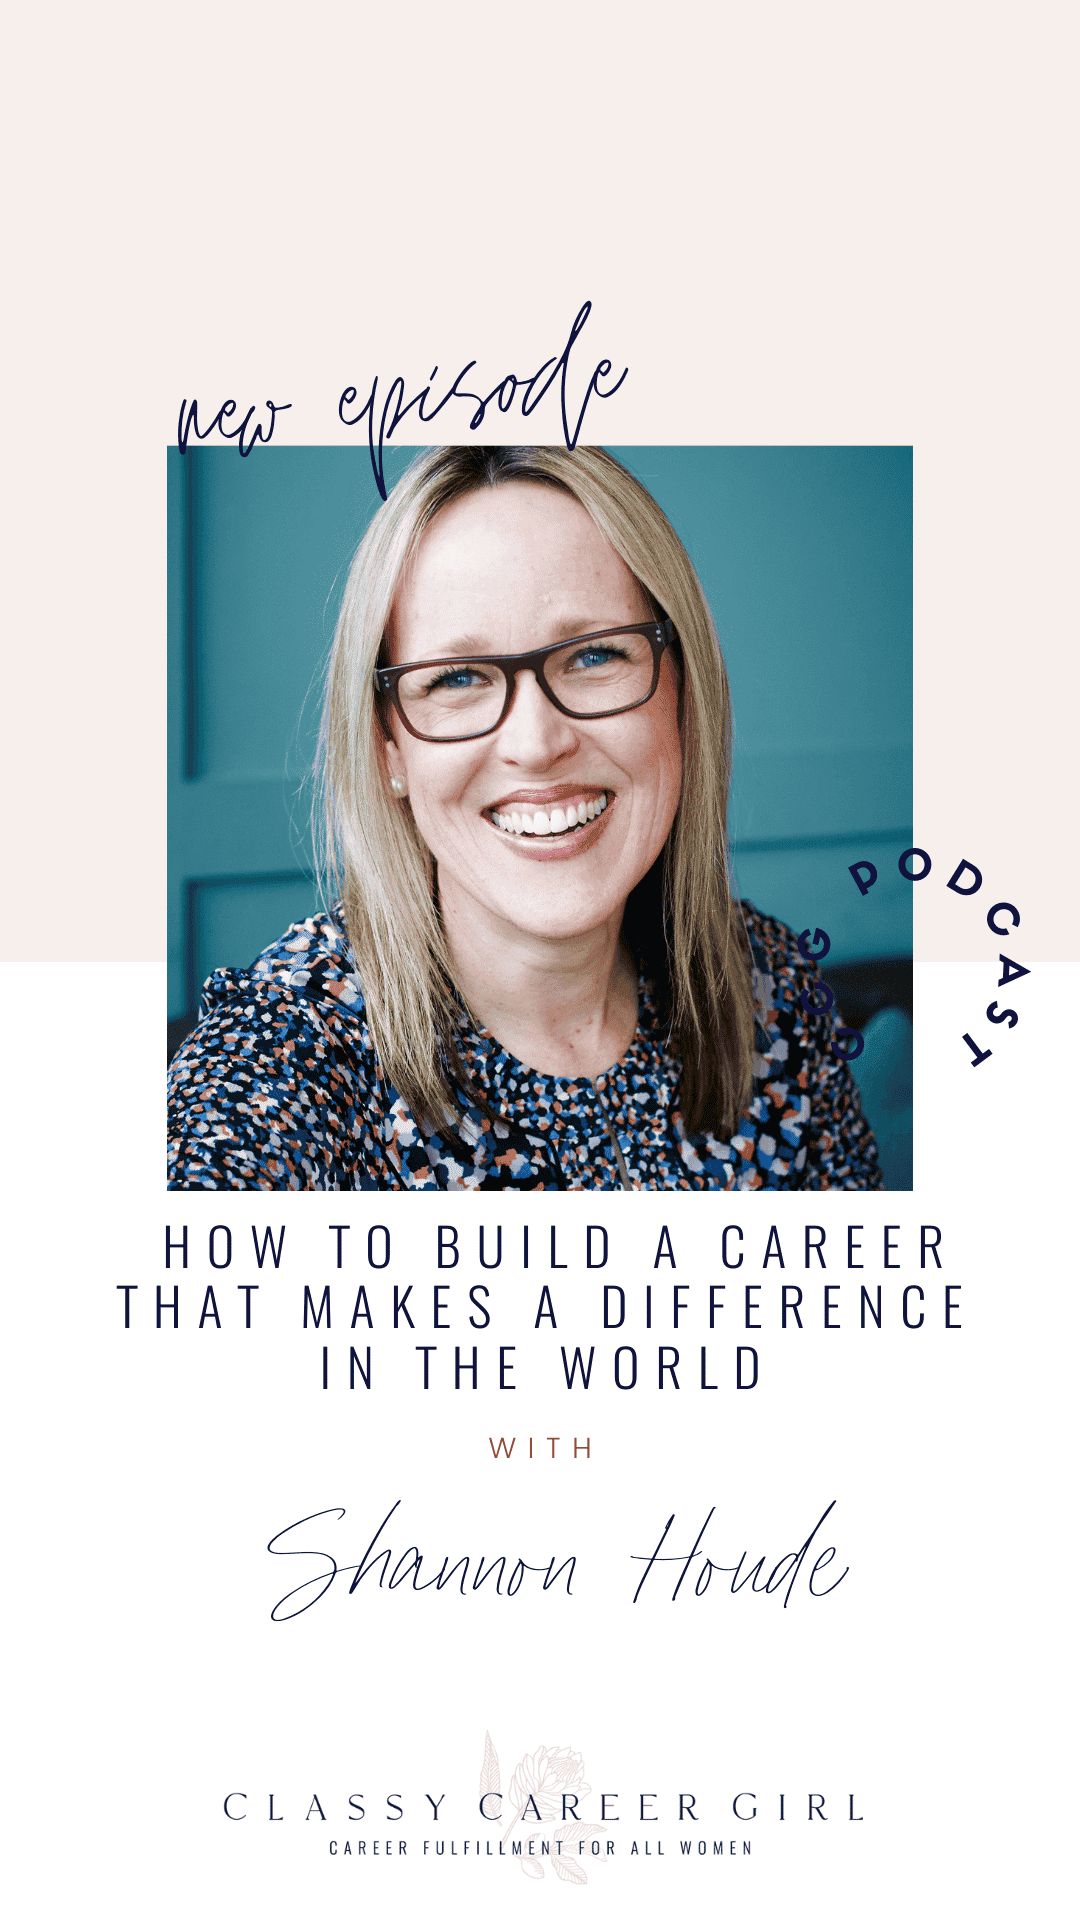 How To Build a Career That Makes a Difference in the World with Shannon Houde - CCG Pin